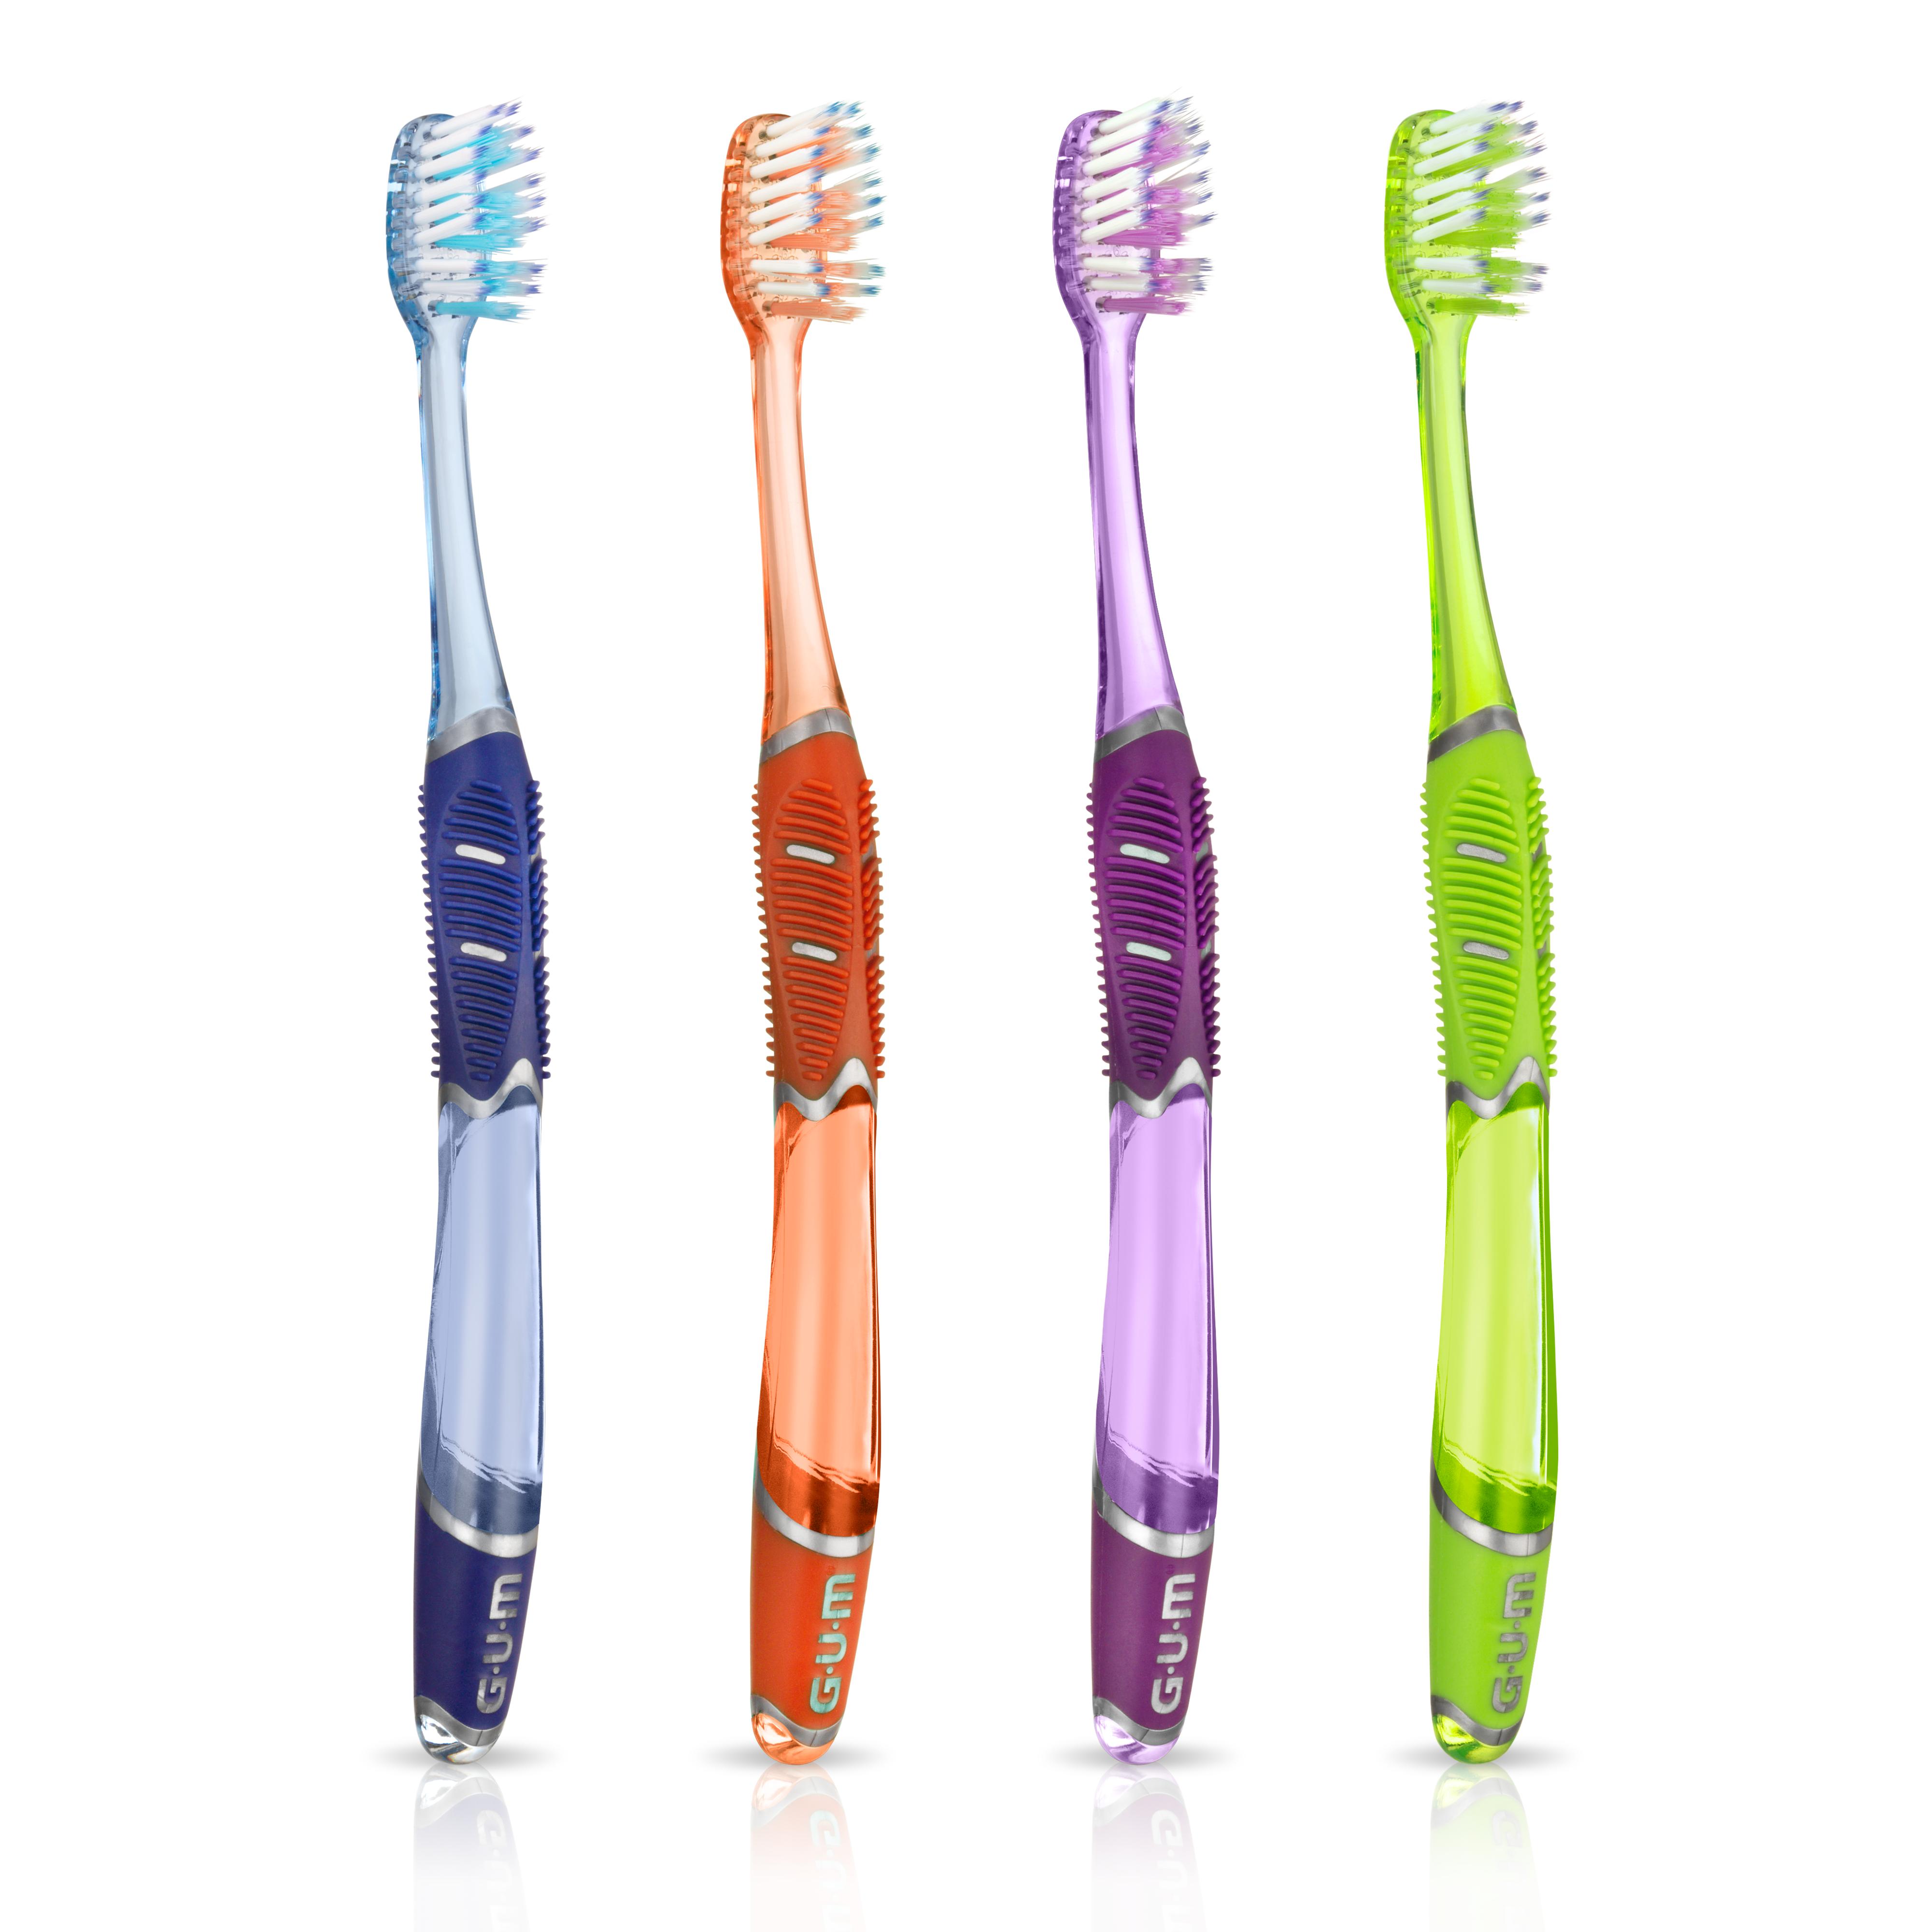 Product-Toothbrush-Technique-DeepClean-525.png